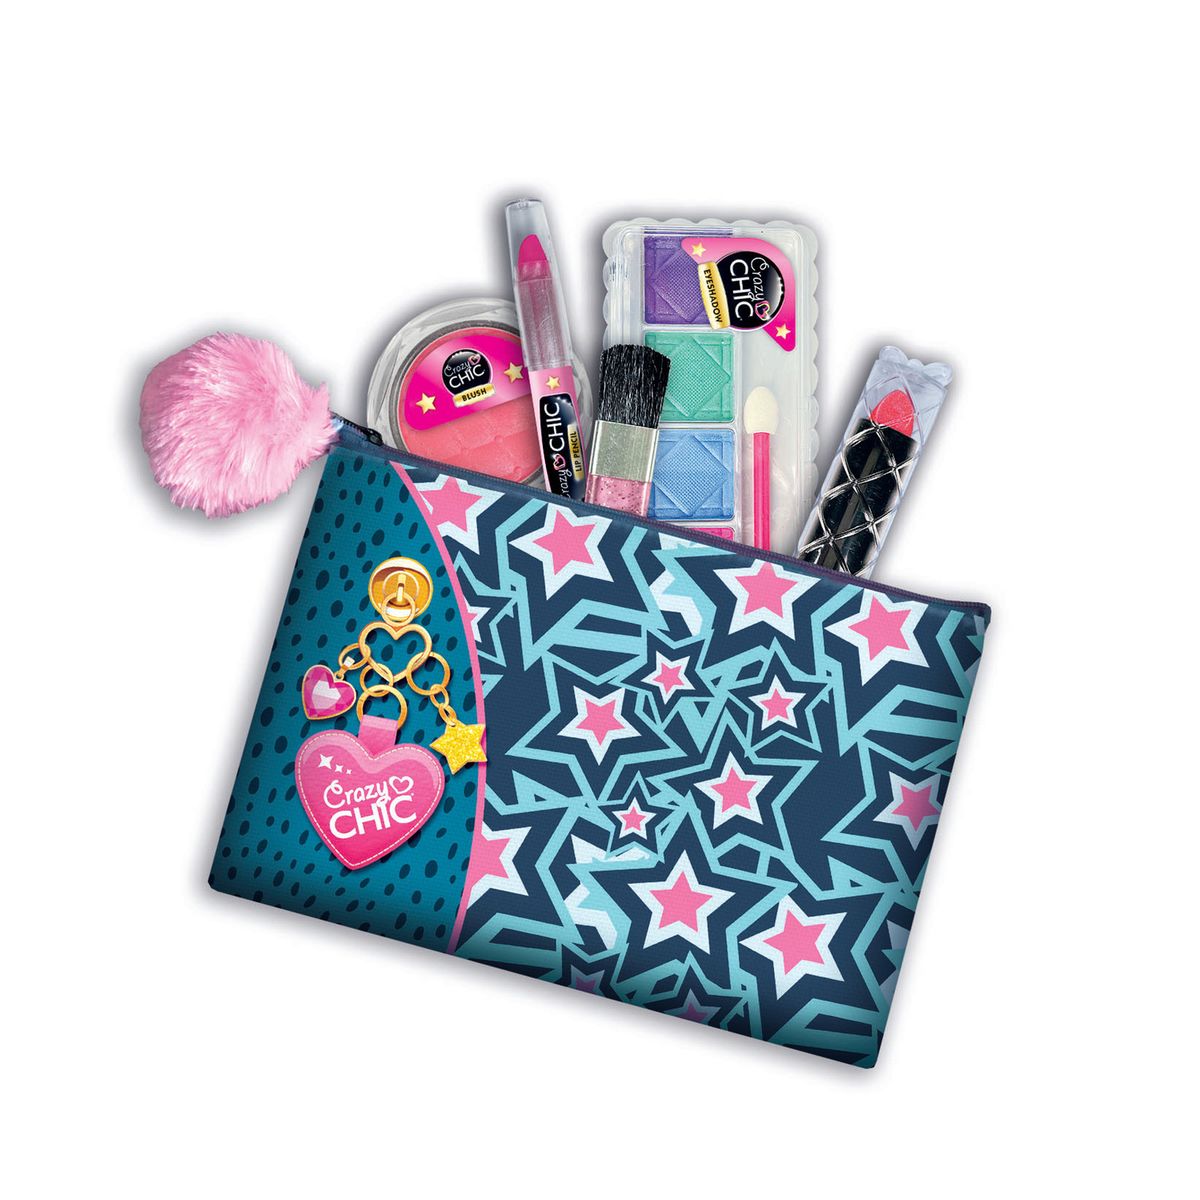 Clementoni CRAZY CHIC Makeup with pouch